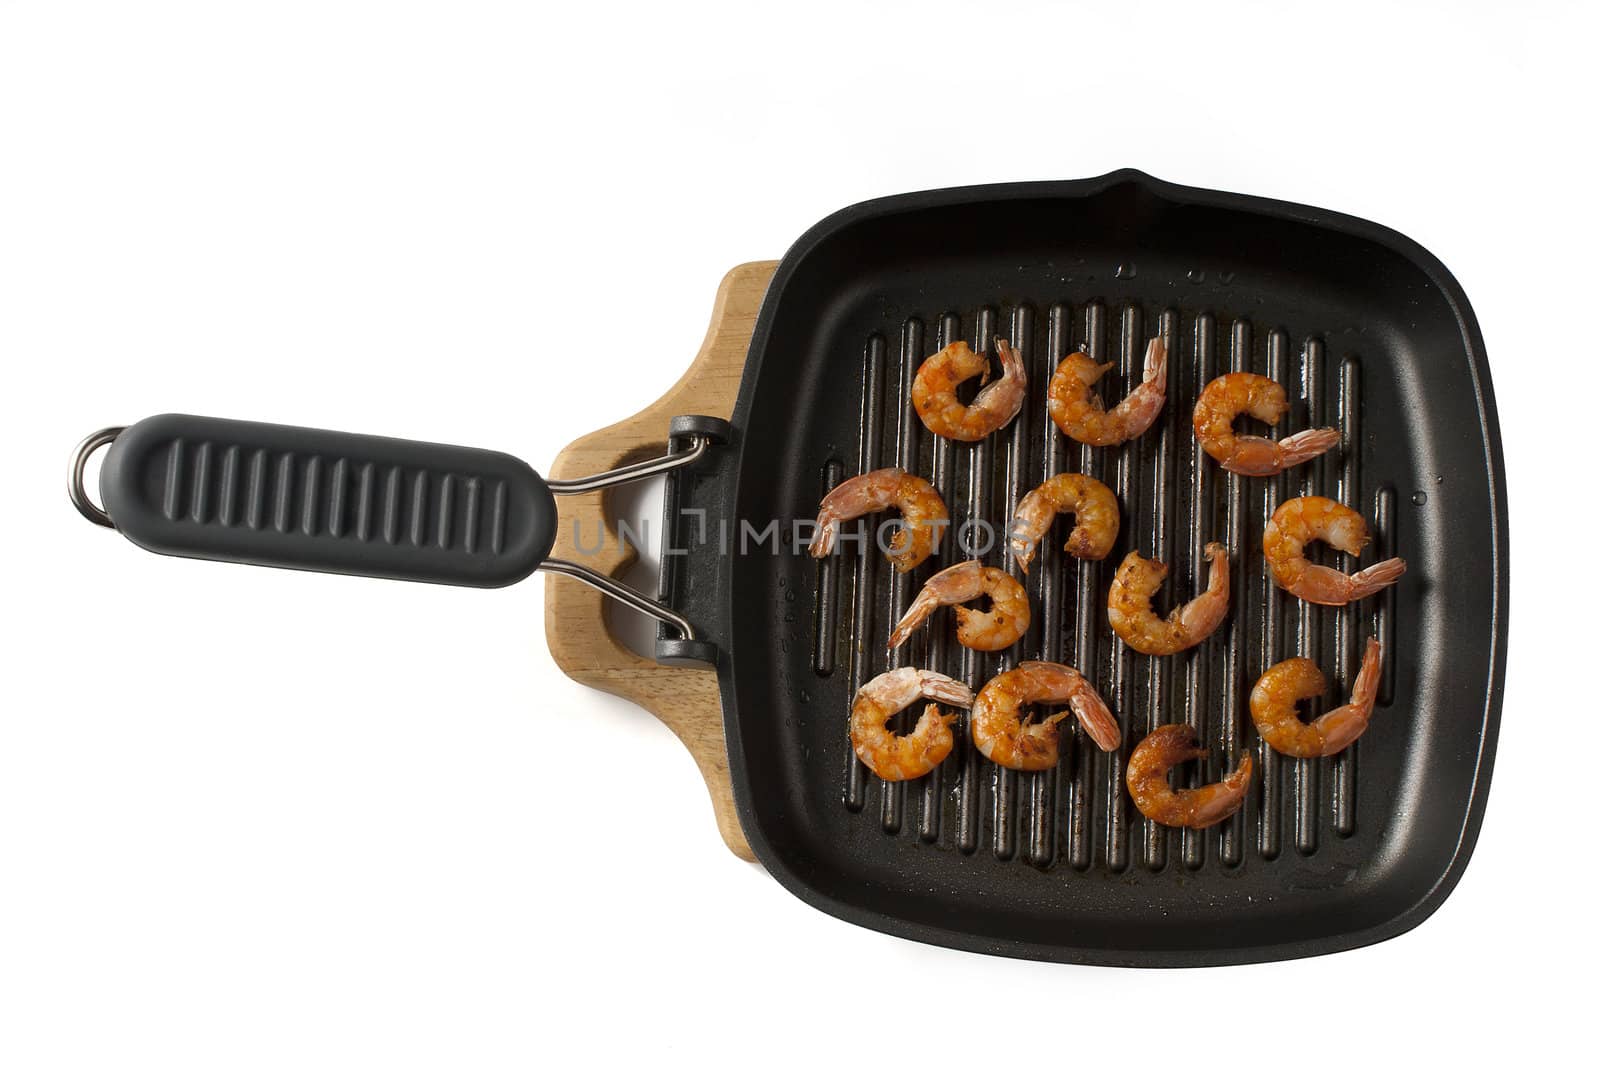 Some roasted shrimps on the grill black pan